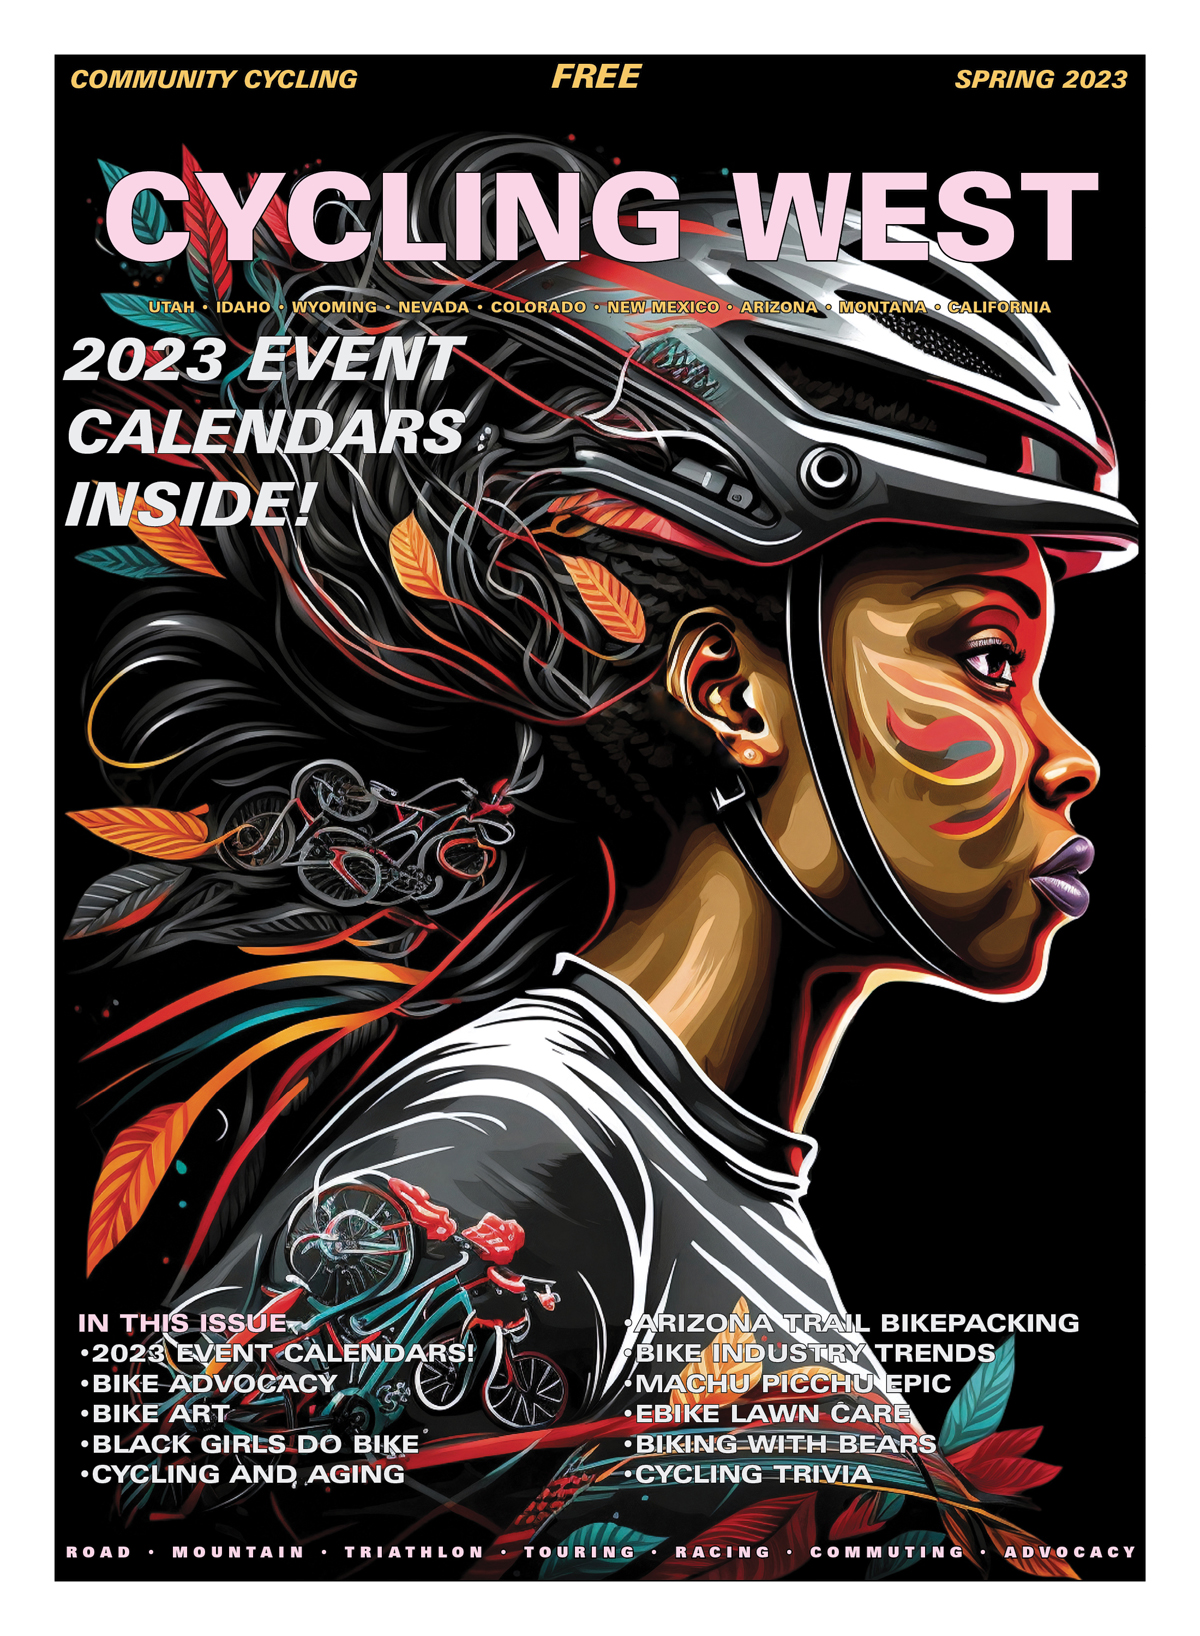 Cycling West Spring 2023 Cover Art Title: Bike FutureArtist name: Monica Godfrey-Garrison (@mogofree_art) Medium: Digital Art Description: Colorful, contrast-heavy image of a black woman cyclist looking off into the distance surrounded by wispy leaves in earth tones Artist Statement: This image illustrates looking toward the diverse and equitable future of cycling. Where to find/buy art: www.mogofree.etsy.com Website: monicagodfrey.com Monica is the Founder and Executive Director of Black Girls Do Bike: blackgirlsdobike.org